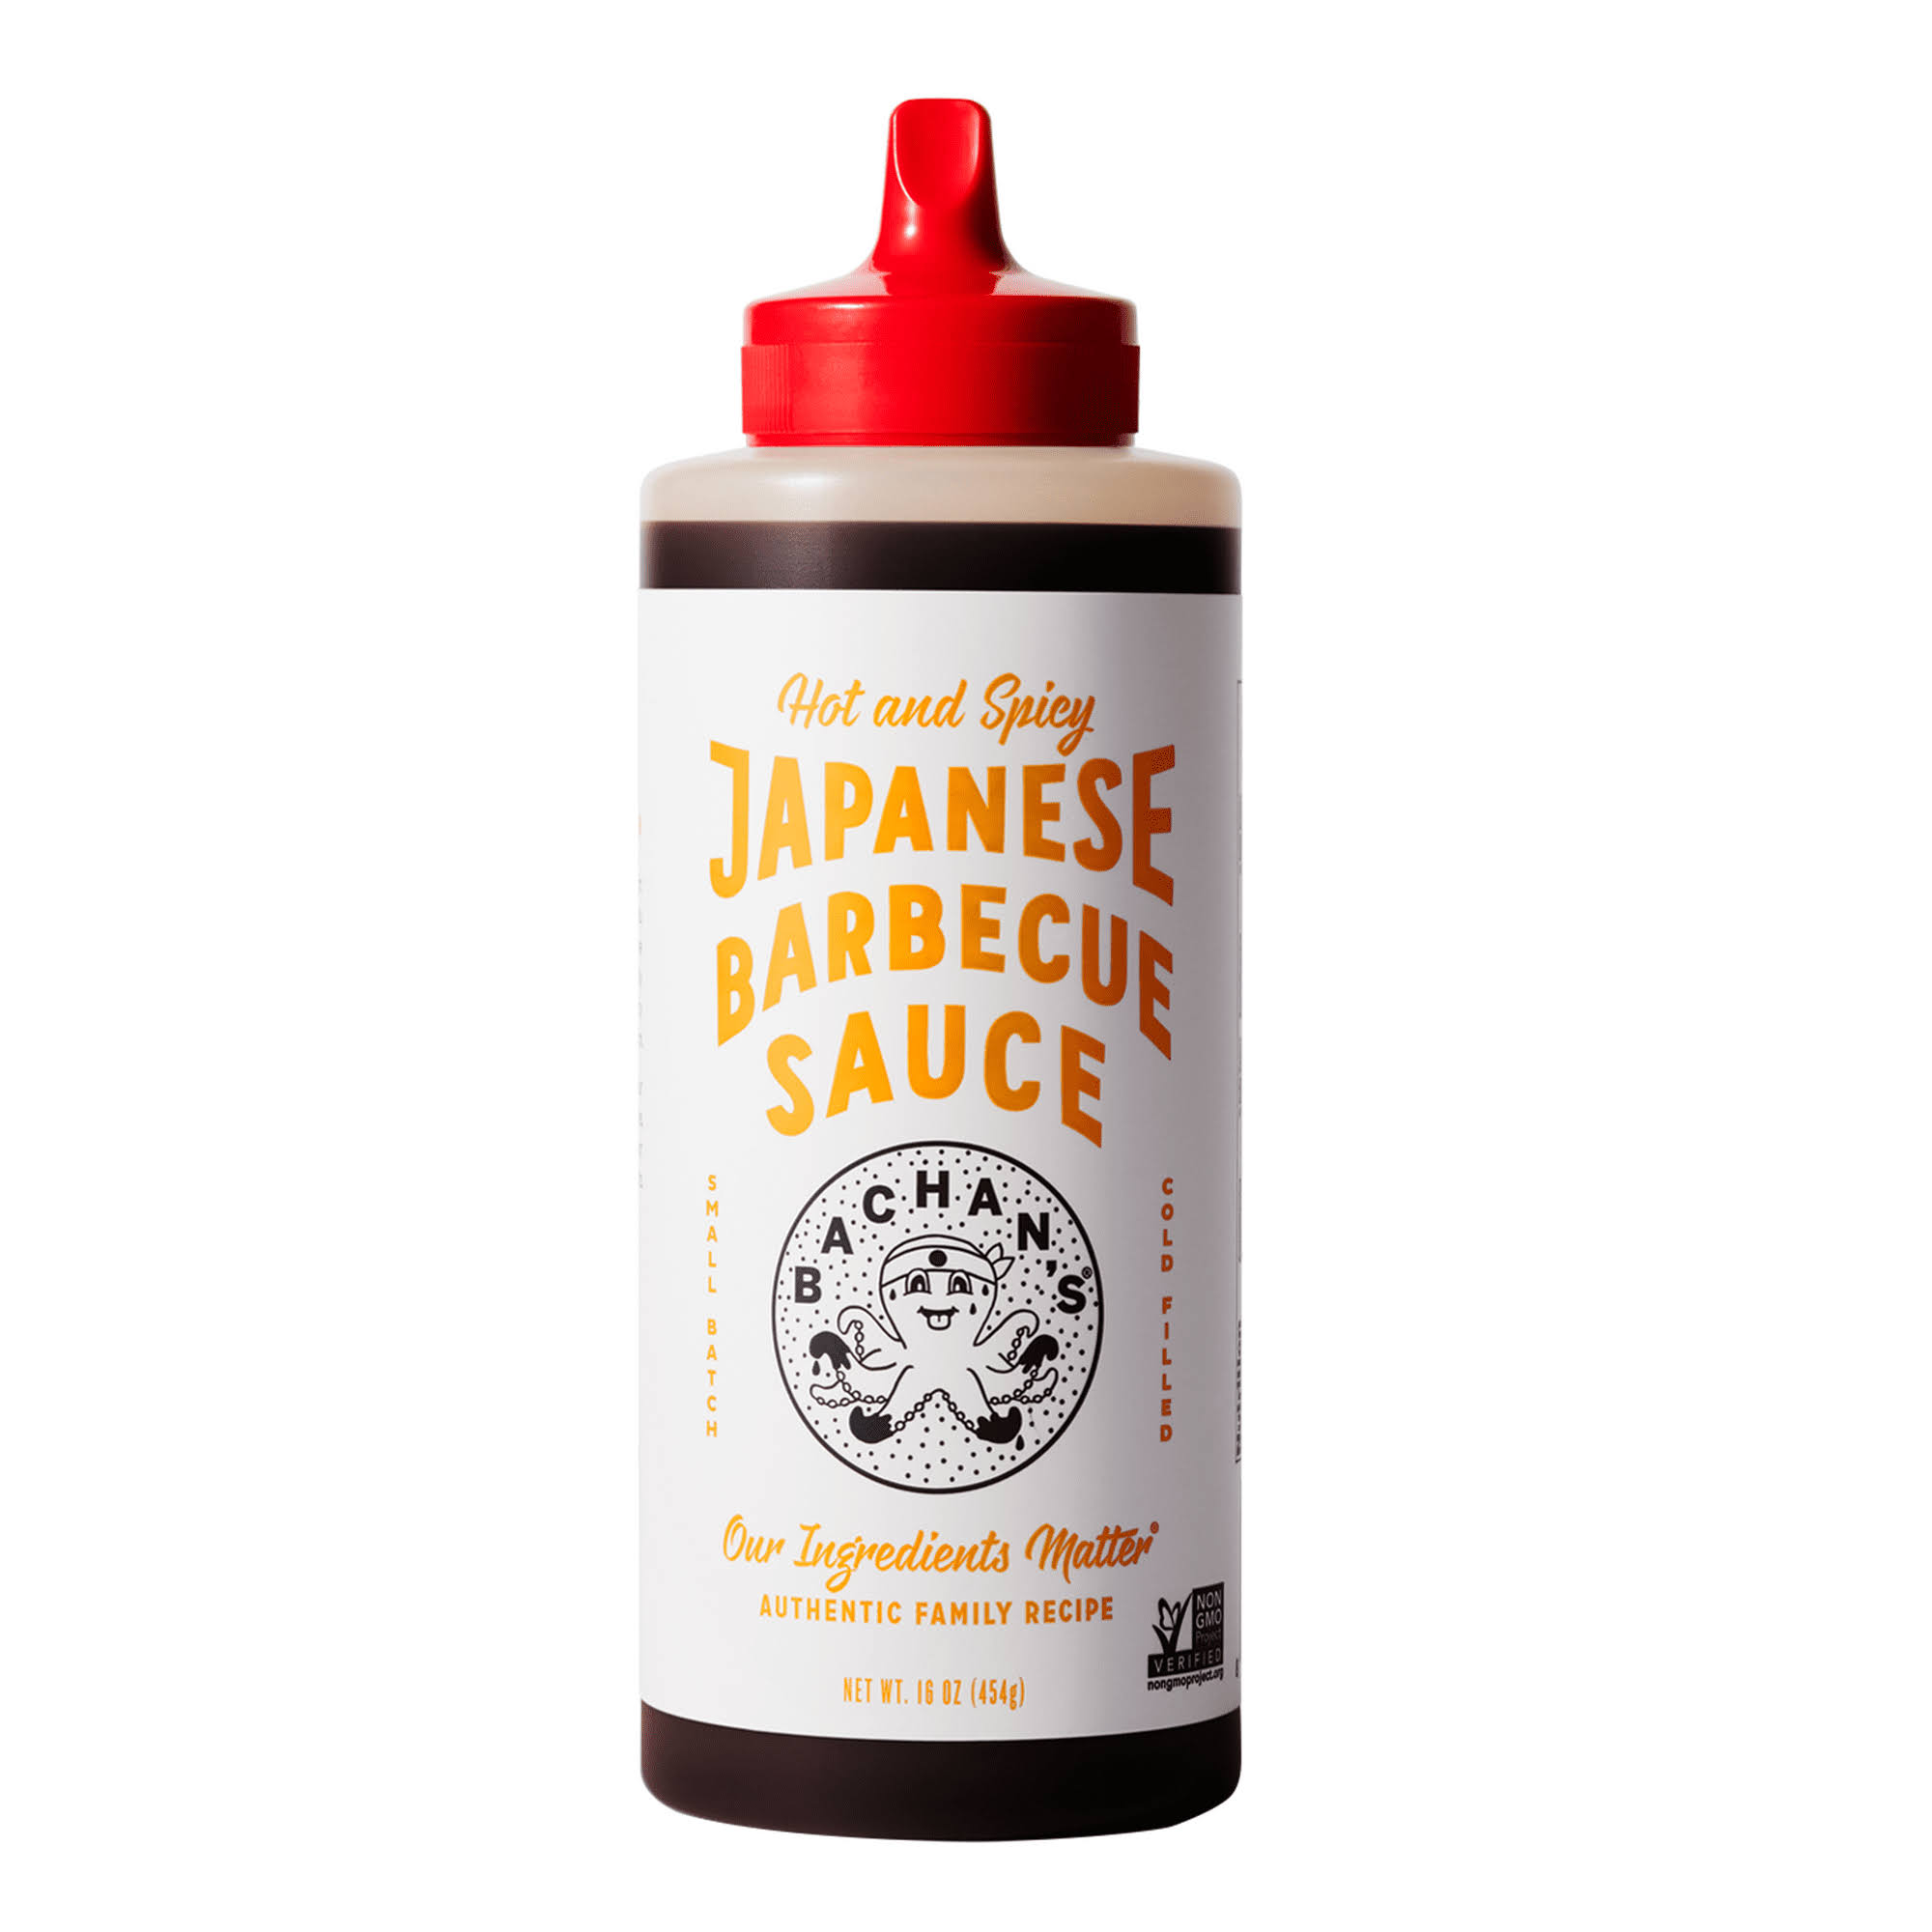 Bachan's Barbecue Sauce, Japanese, Hot & Spicy - 16 oz